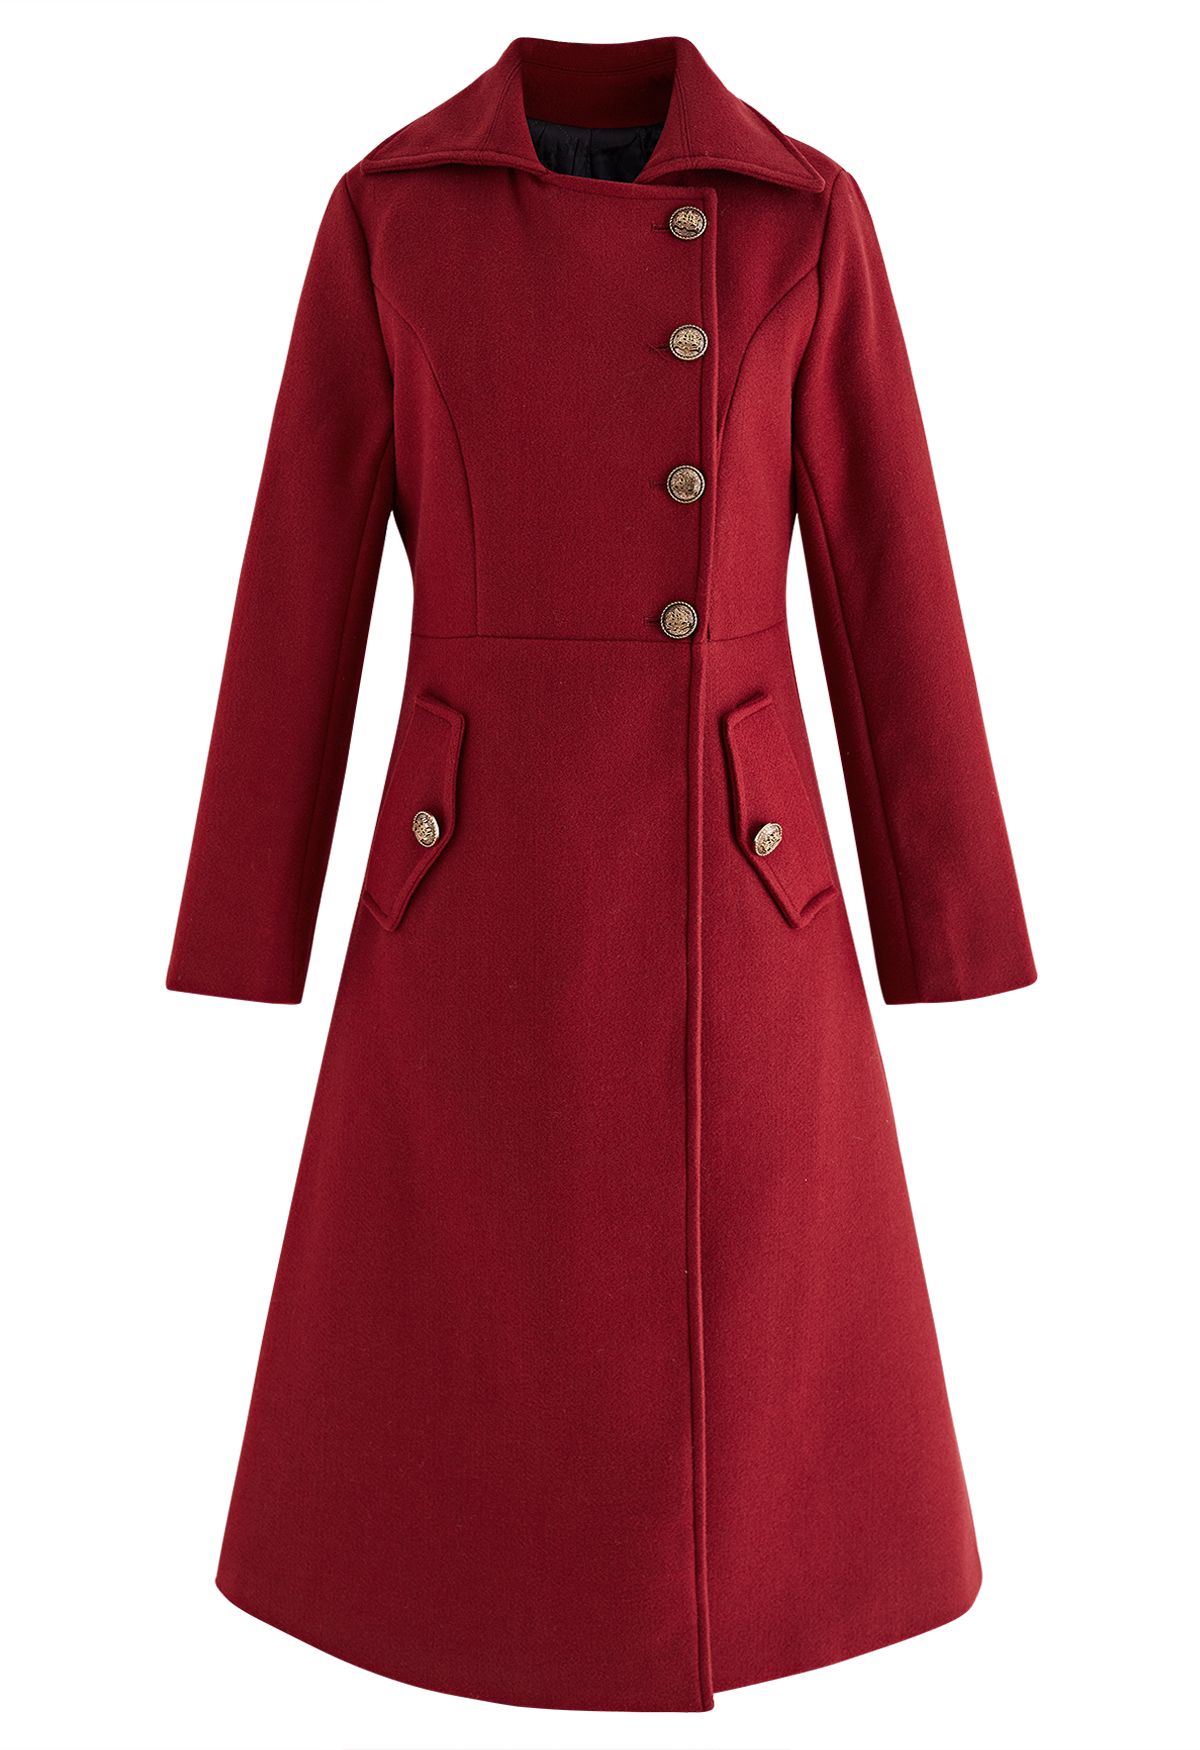 Modish Golden Button Wool-Blend Longline Coat in Red - Retro, Indie and ...